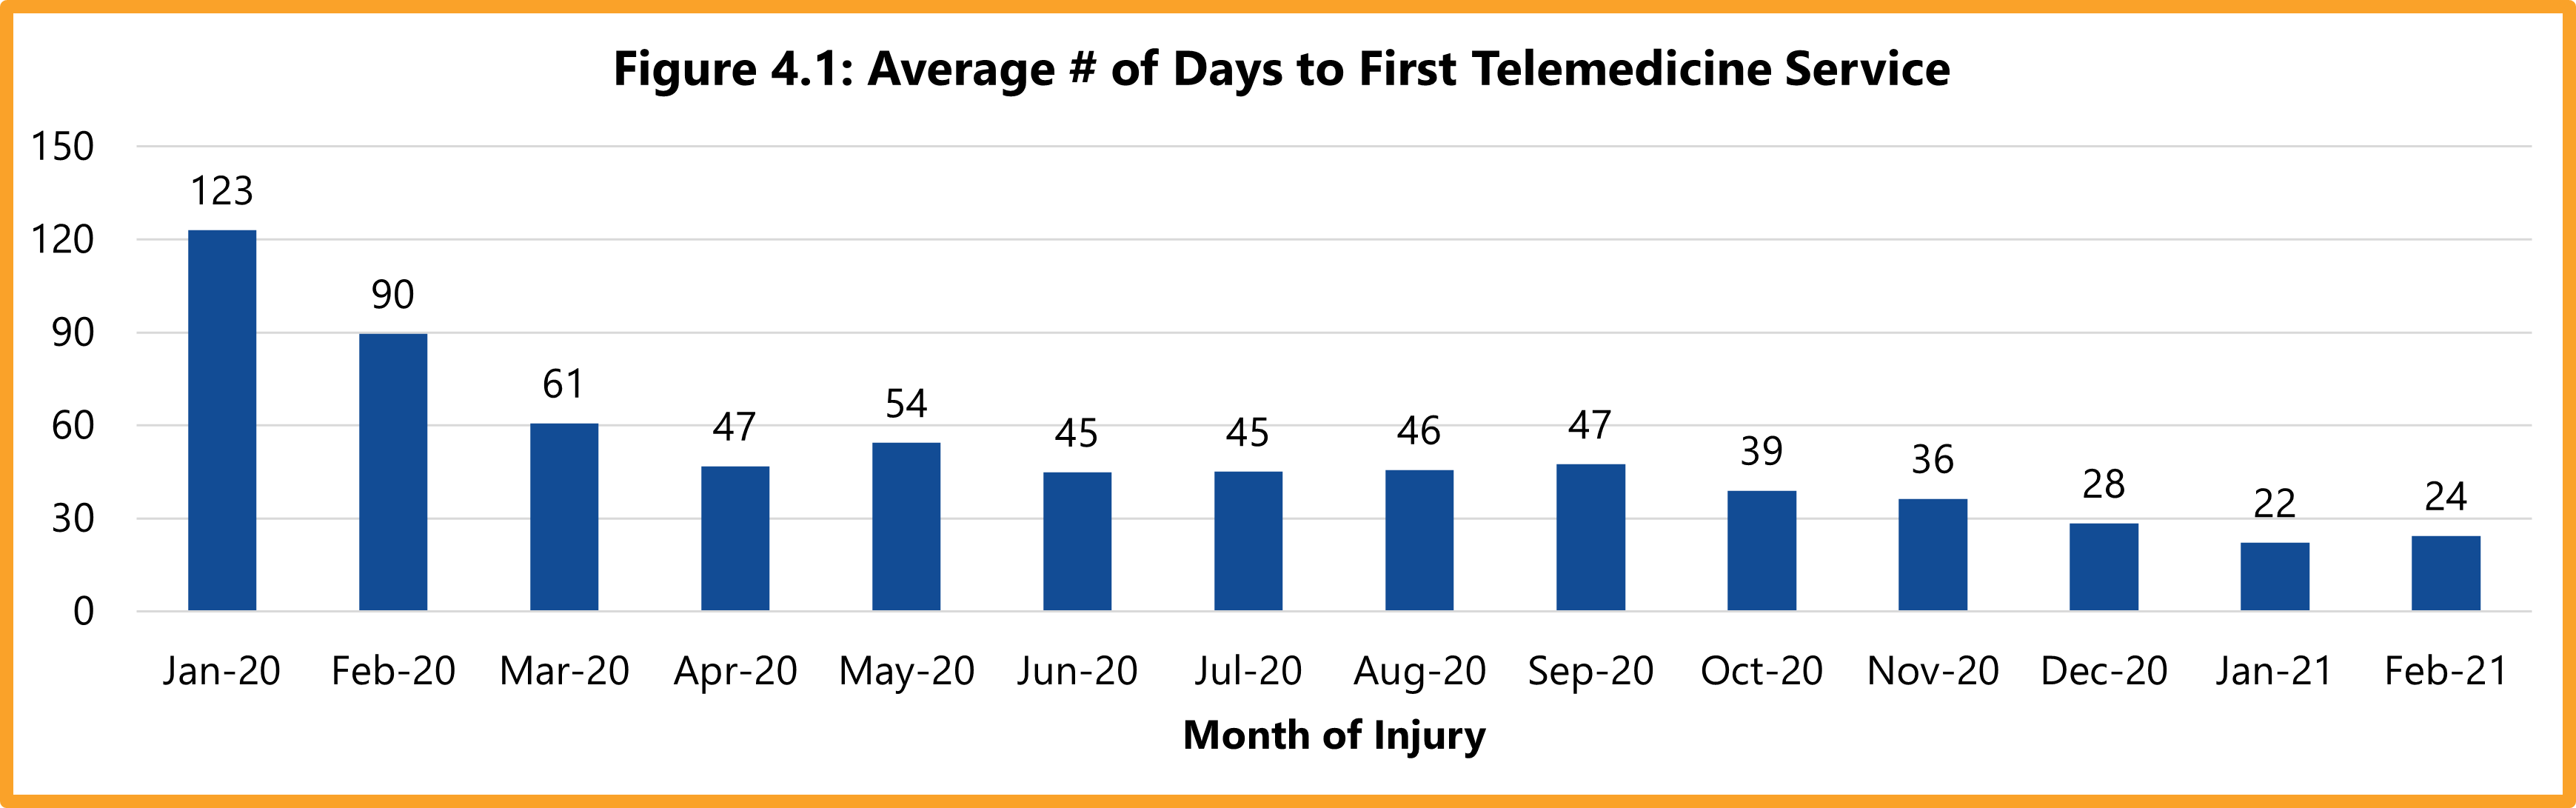 Average number of days to first telemedicine service, January 2020 (123) through February 2021 (24).